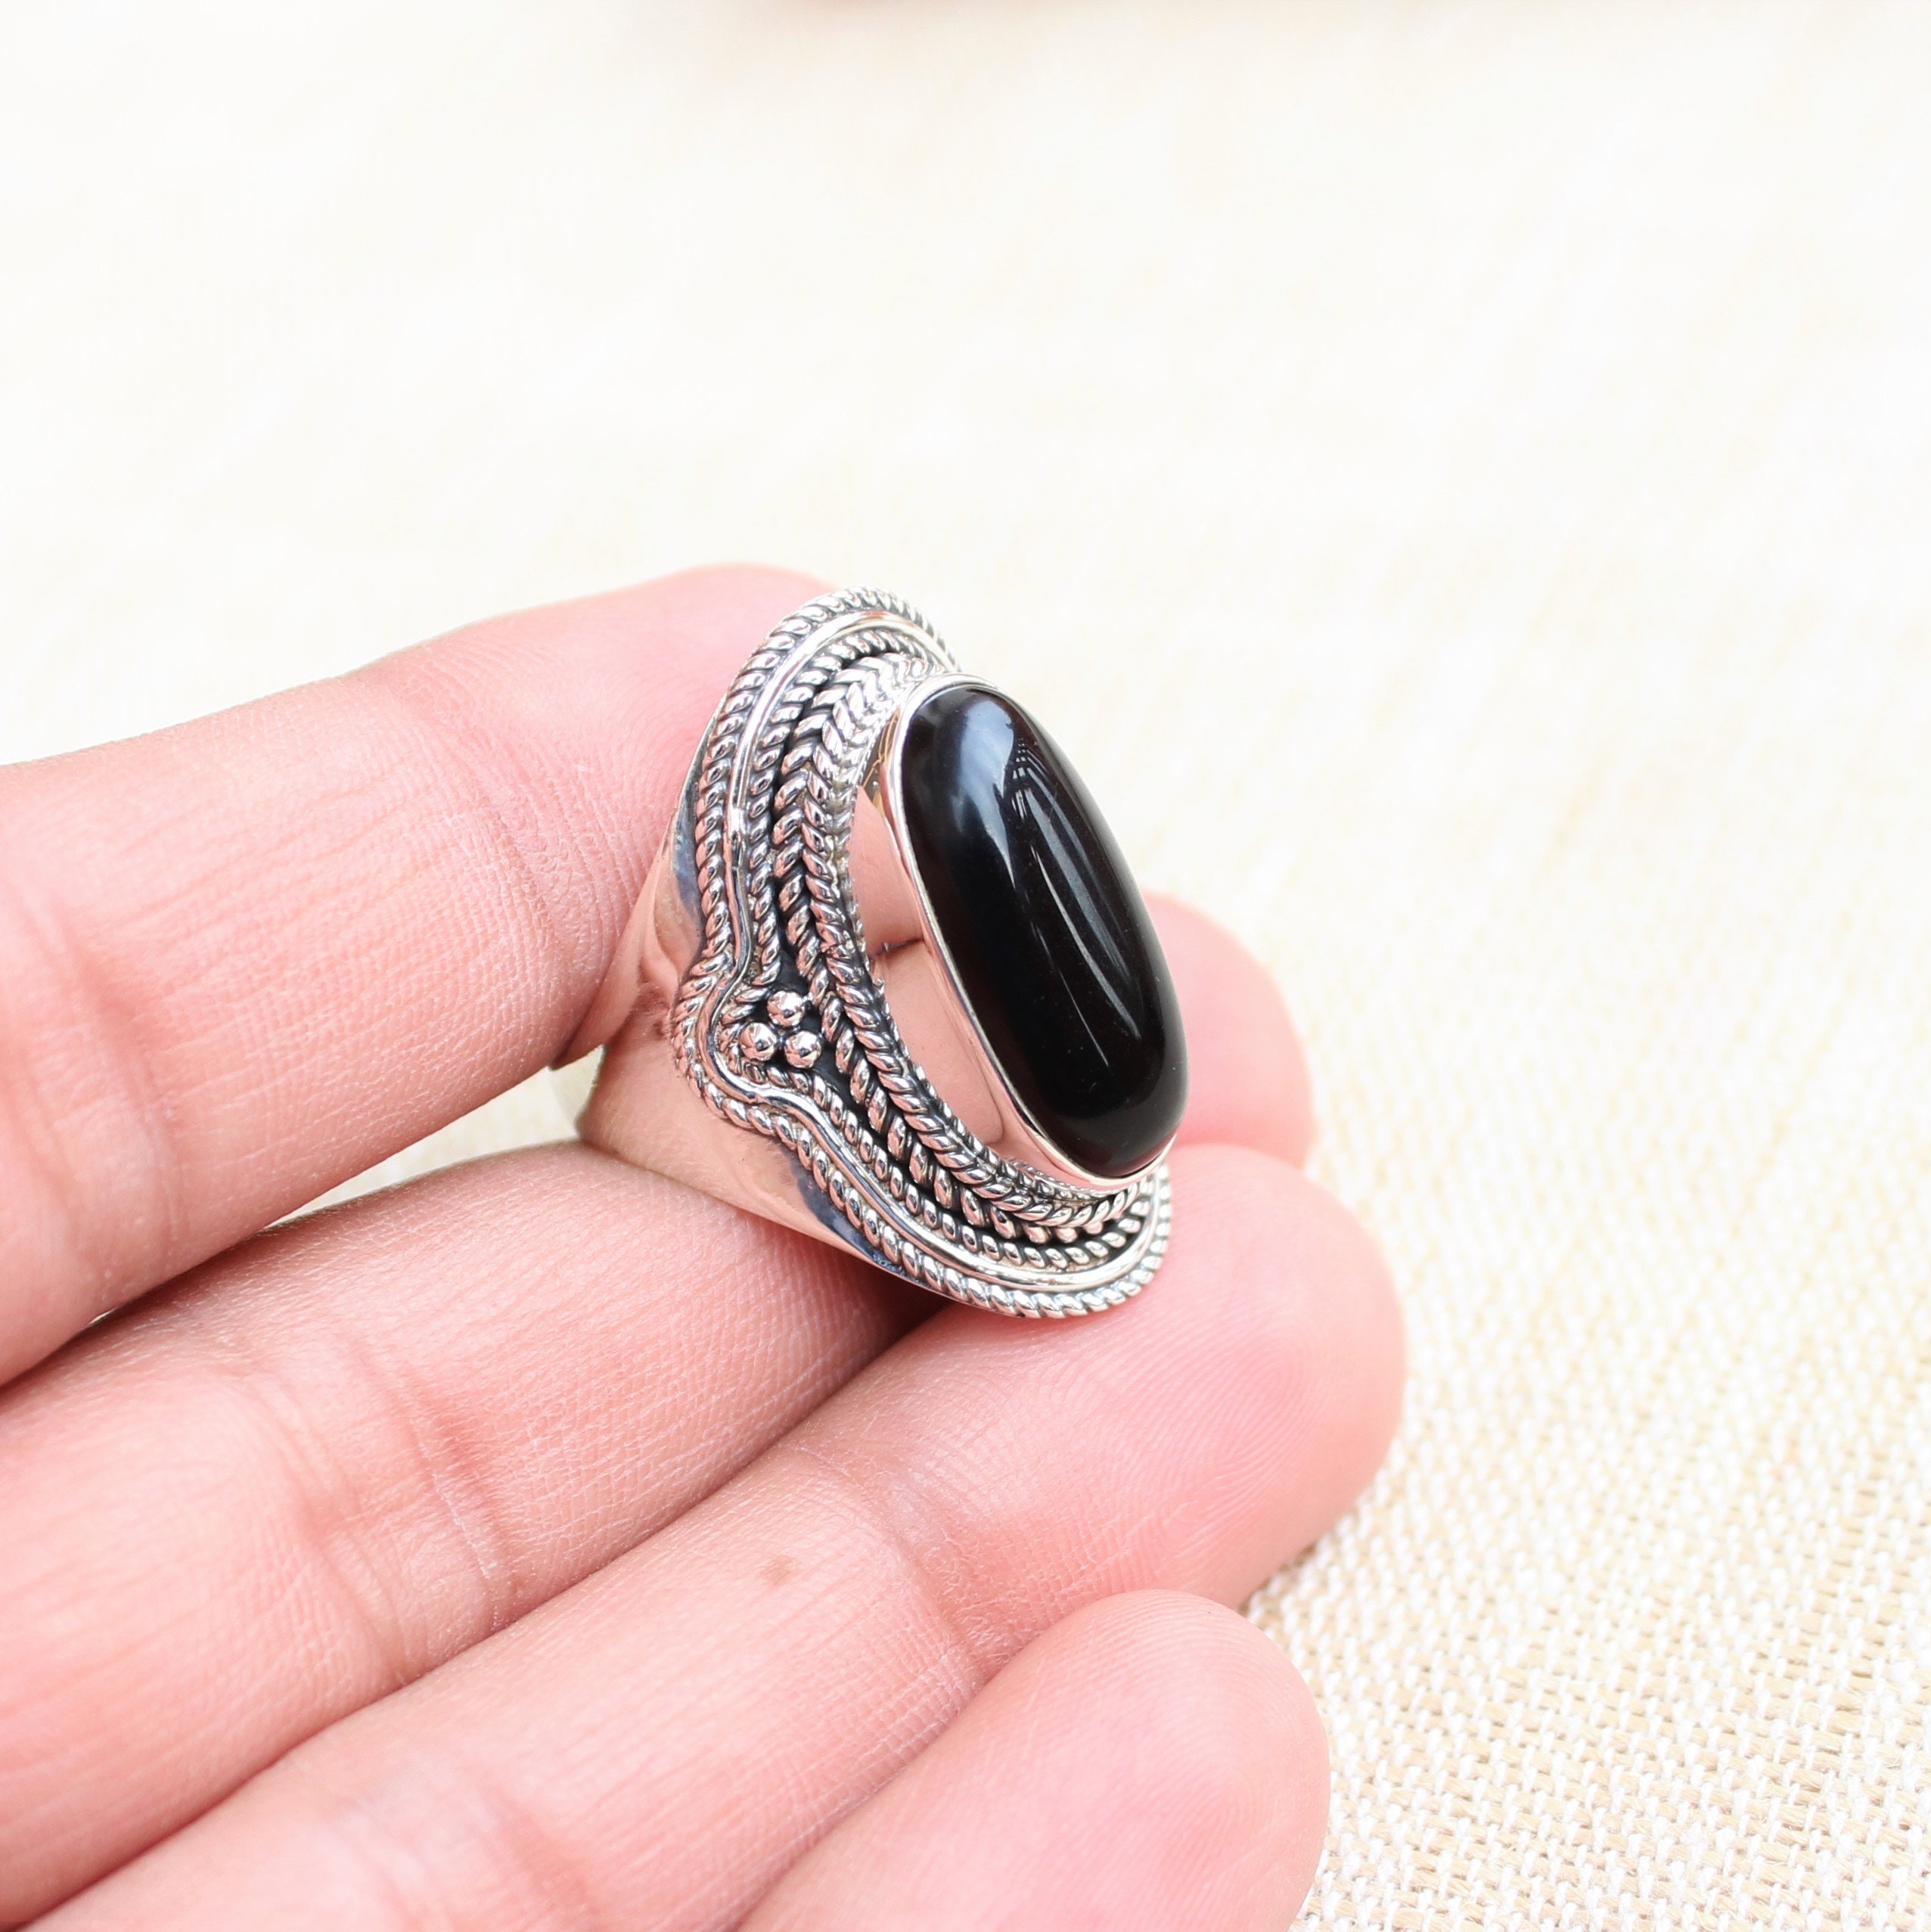 Black Onyx Ring Gift for Her Dainty Ring Wedding Jewelry - Etsy